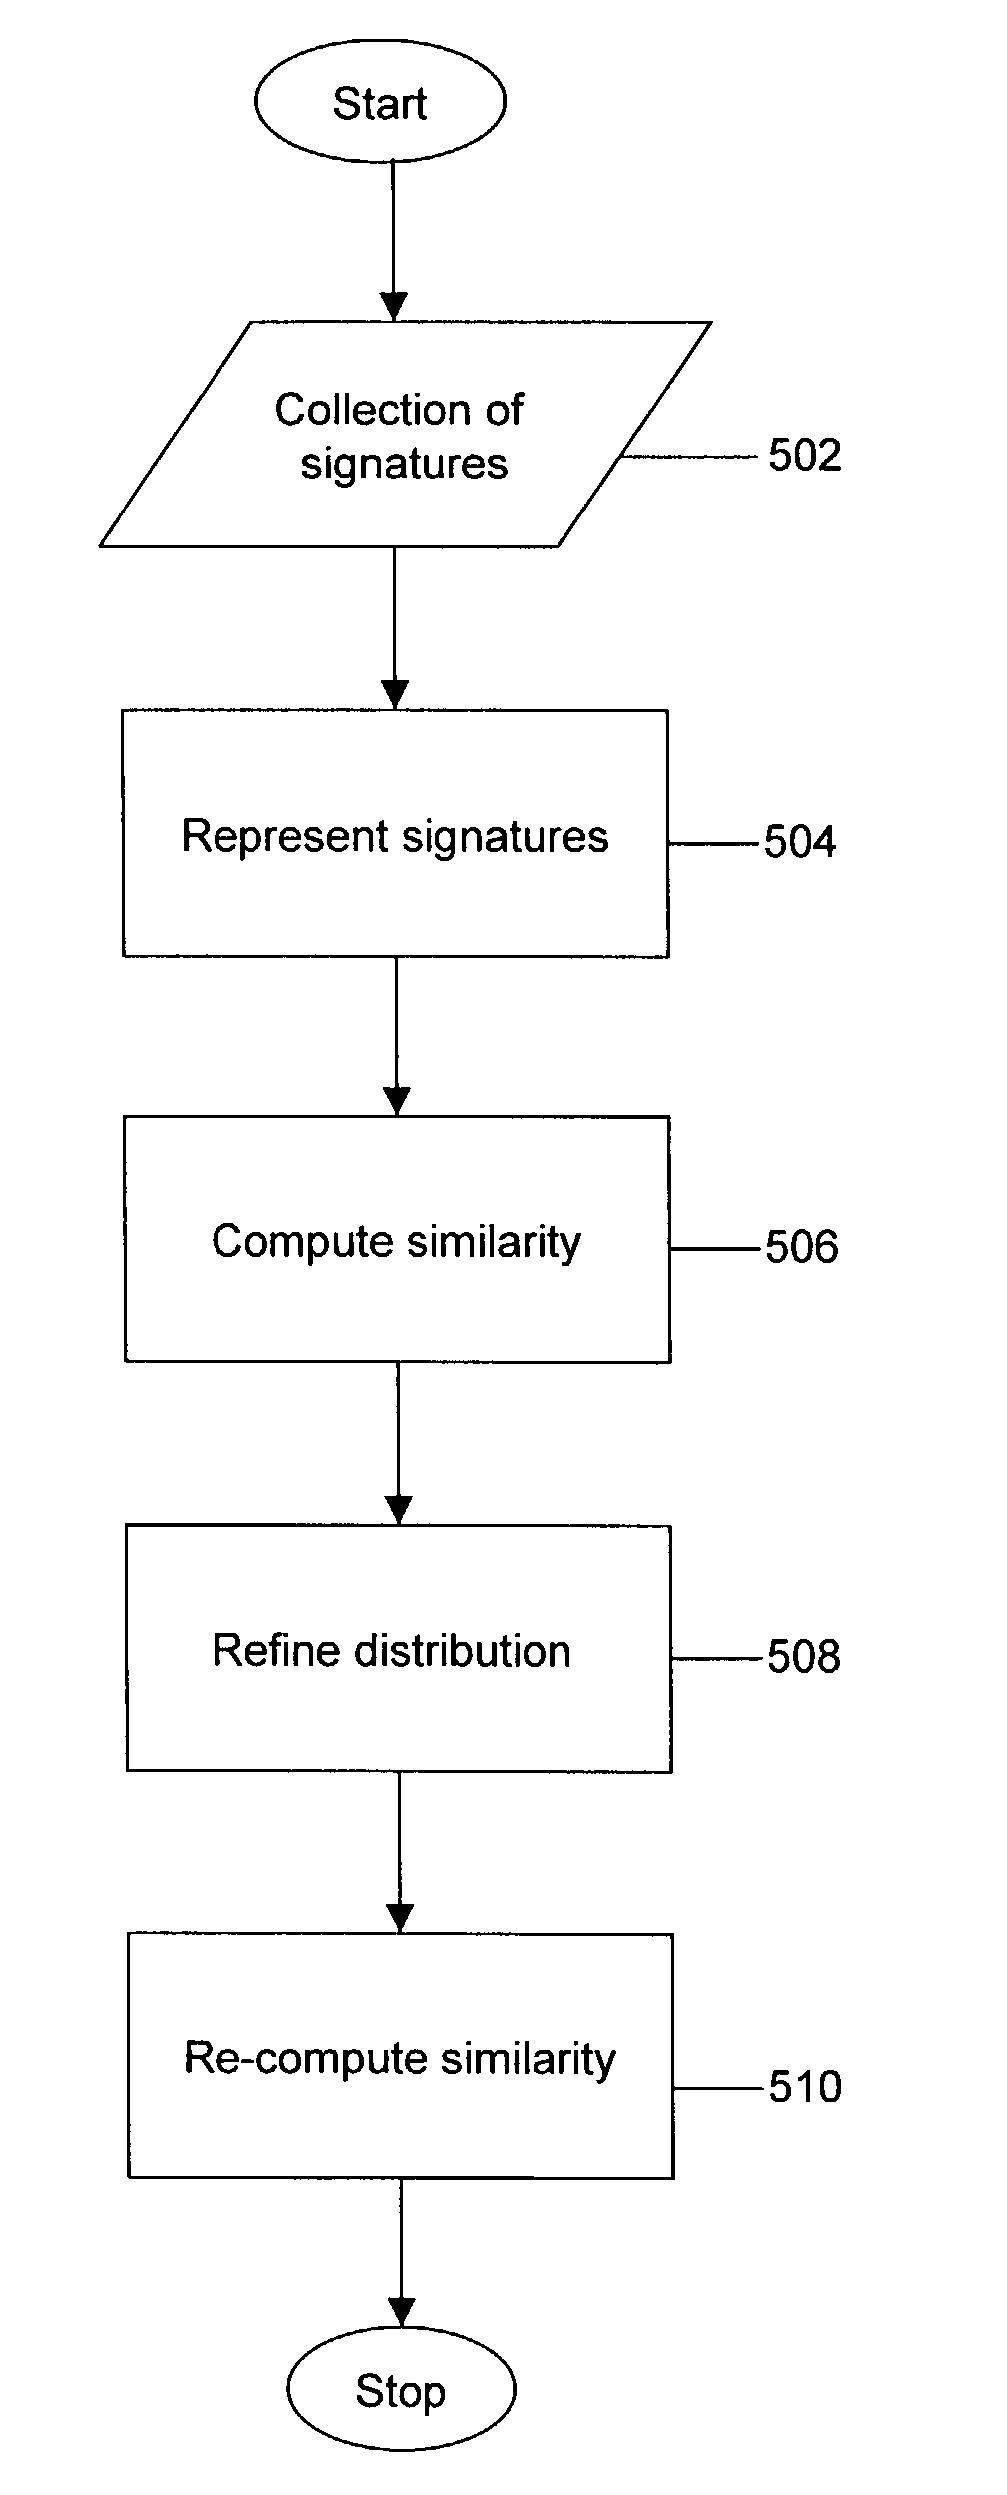 System and method for automatically discovering a hierarchy of concepts from a corpus of documents